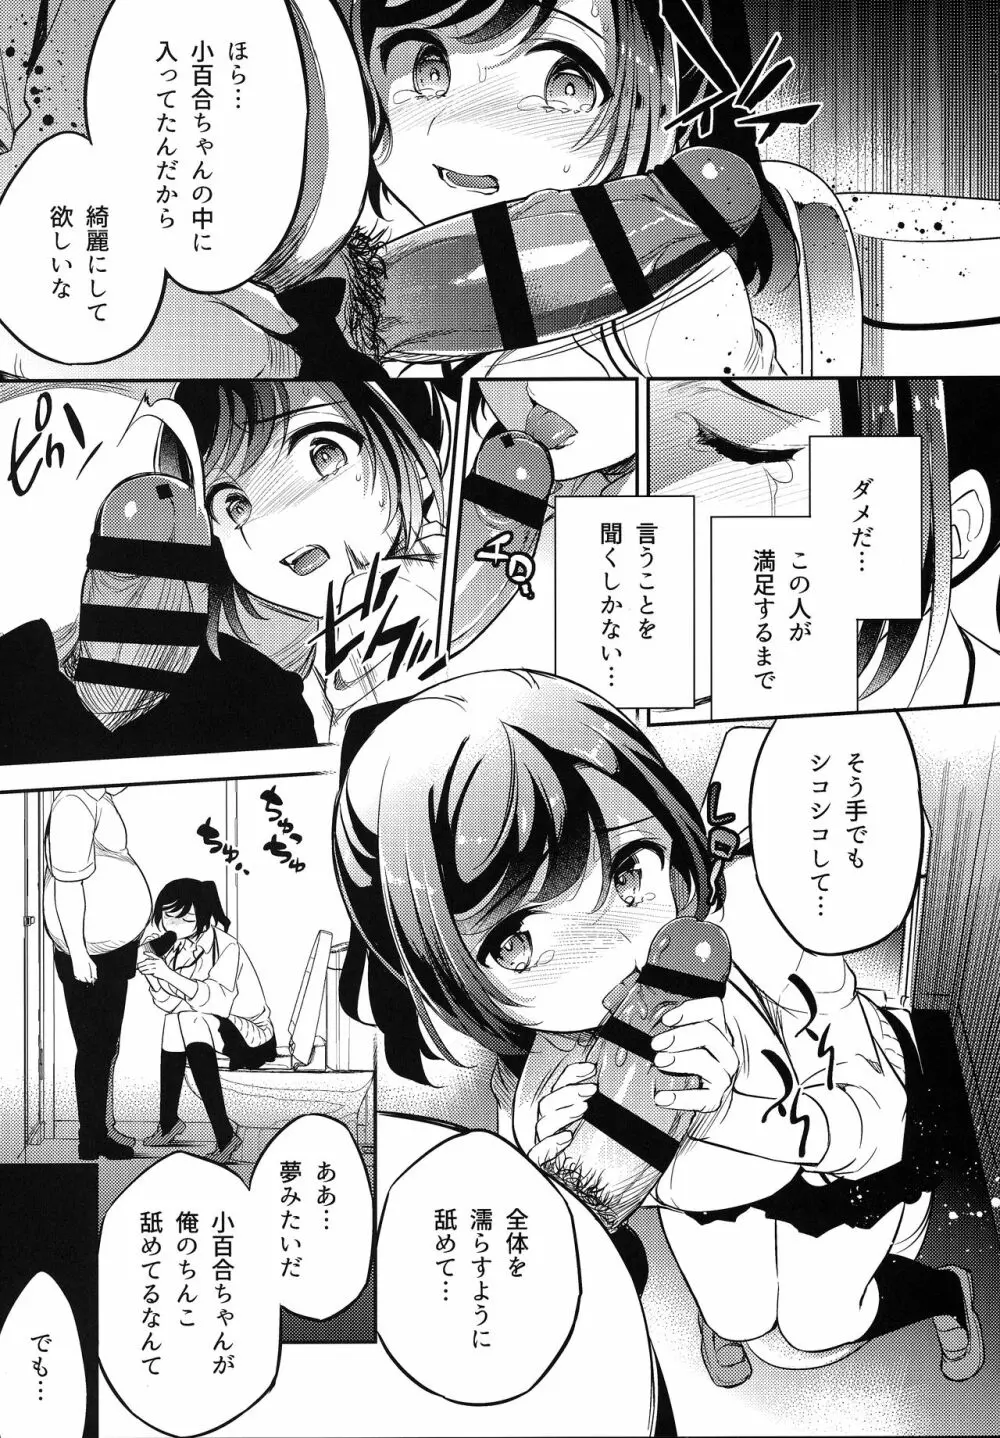 C9-42 小百合 2 少女は駅のトイレで犯される - page6